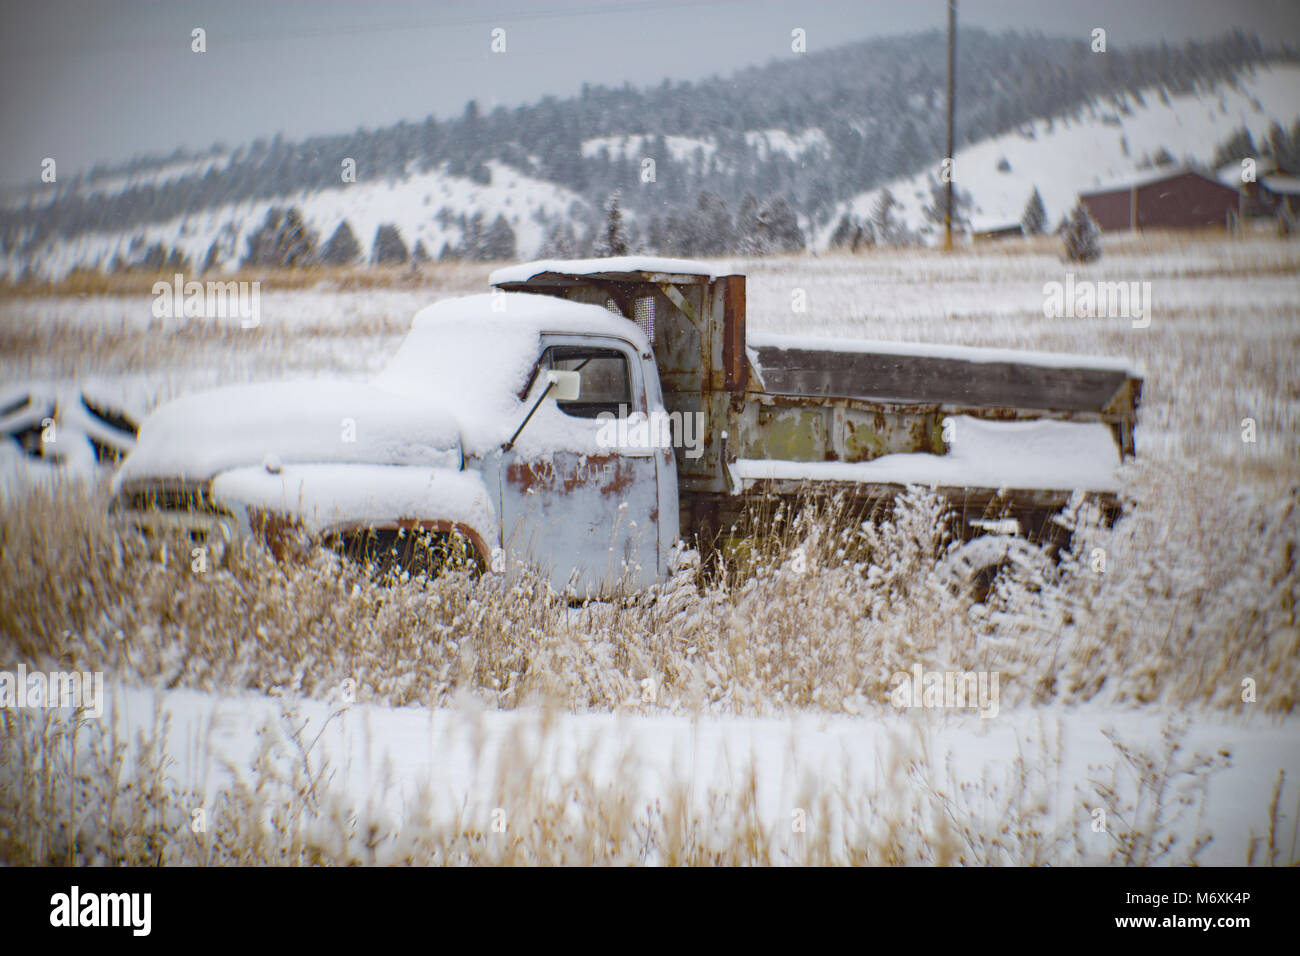 A 1953 Ford dump truck, in a snow-covered field, in Philipsburg, Montana Stock Photo